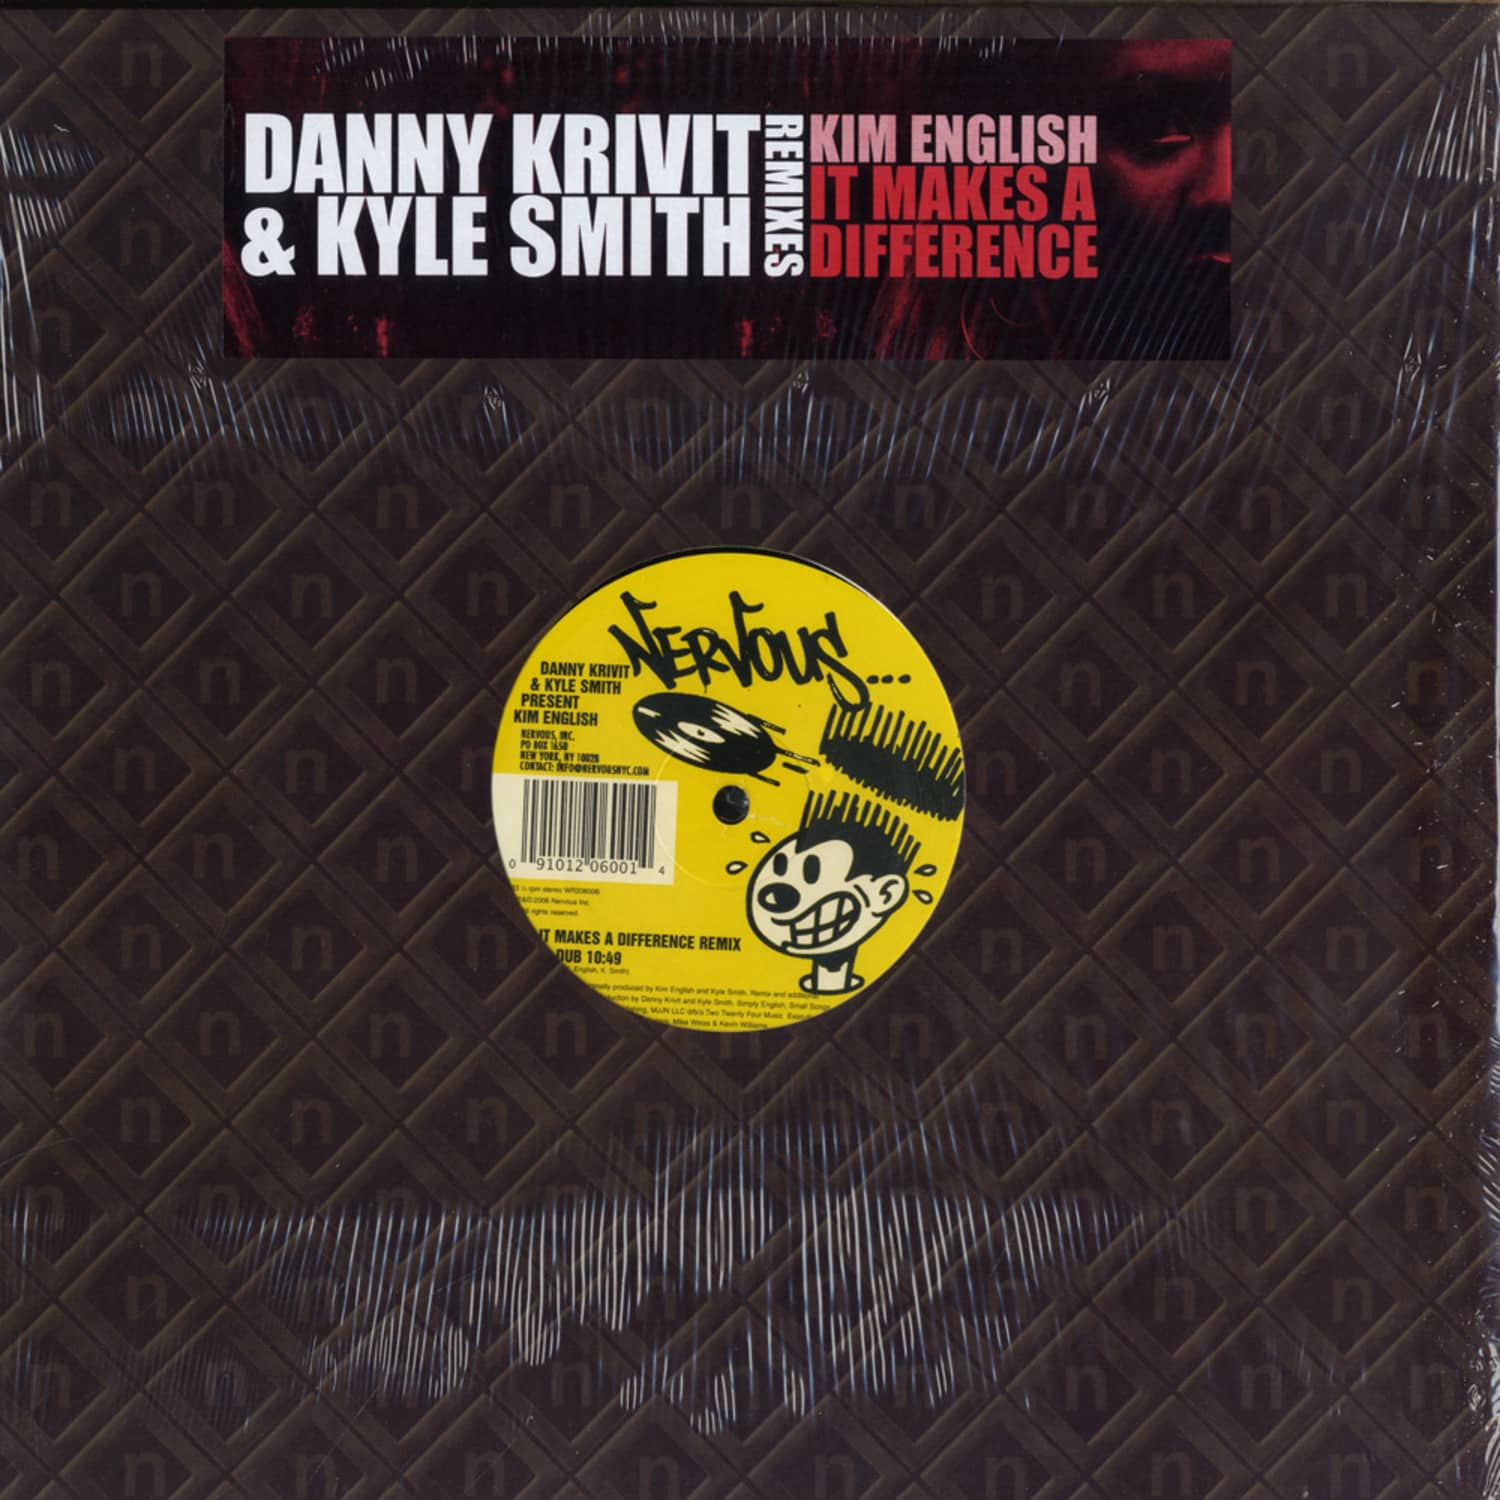 Danny Krivit & Kyle Smith - IT MAKES A DIFFERENCE